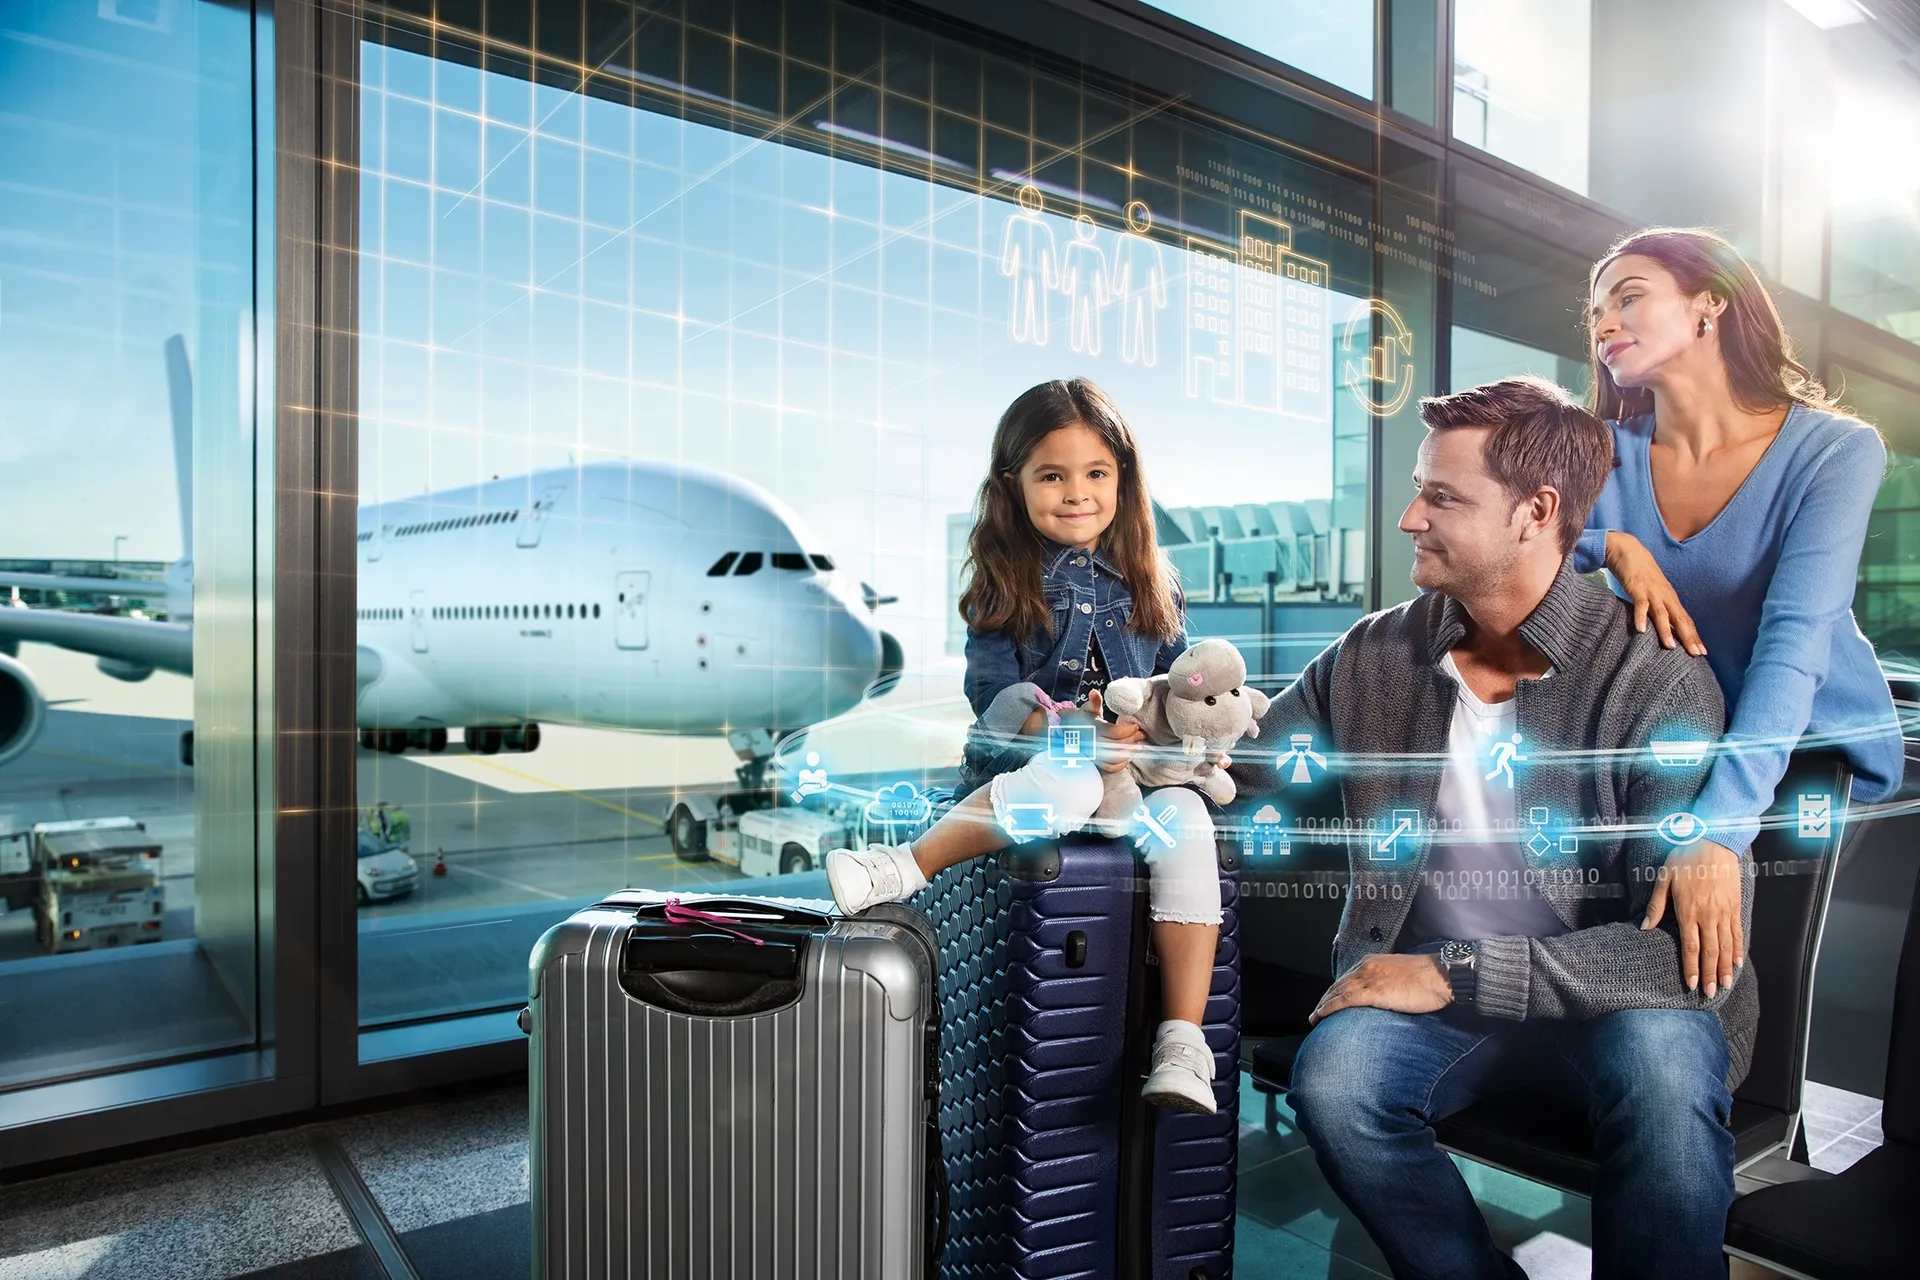 Siemens technology ensures the surveillance and protection of many airports.